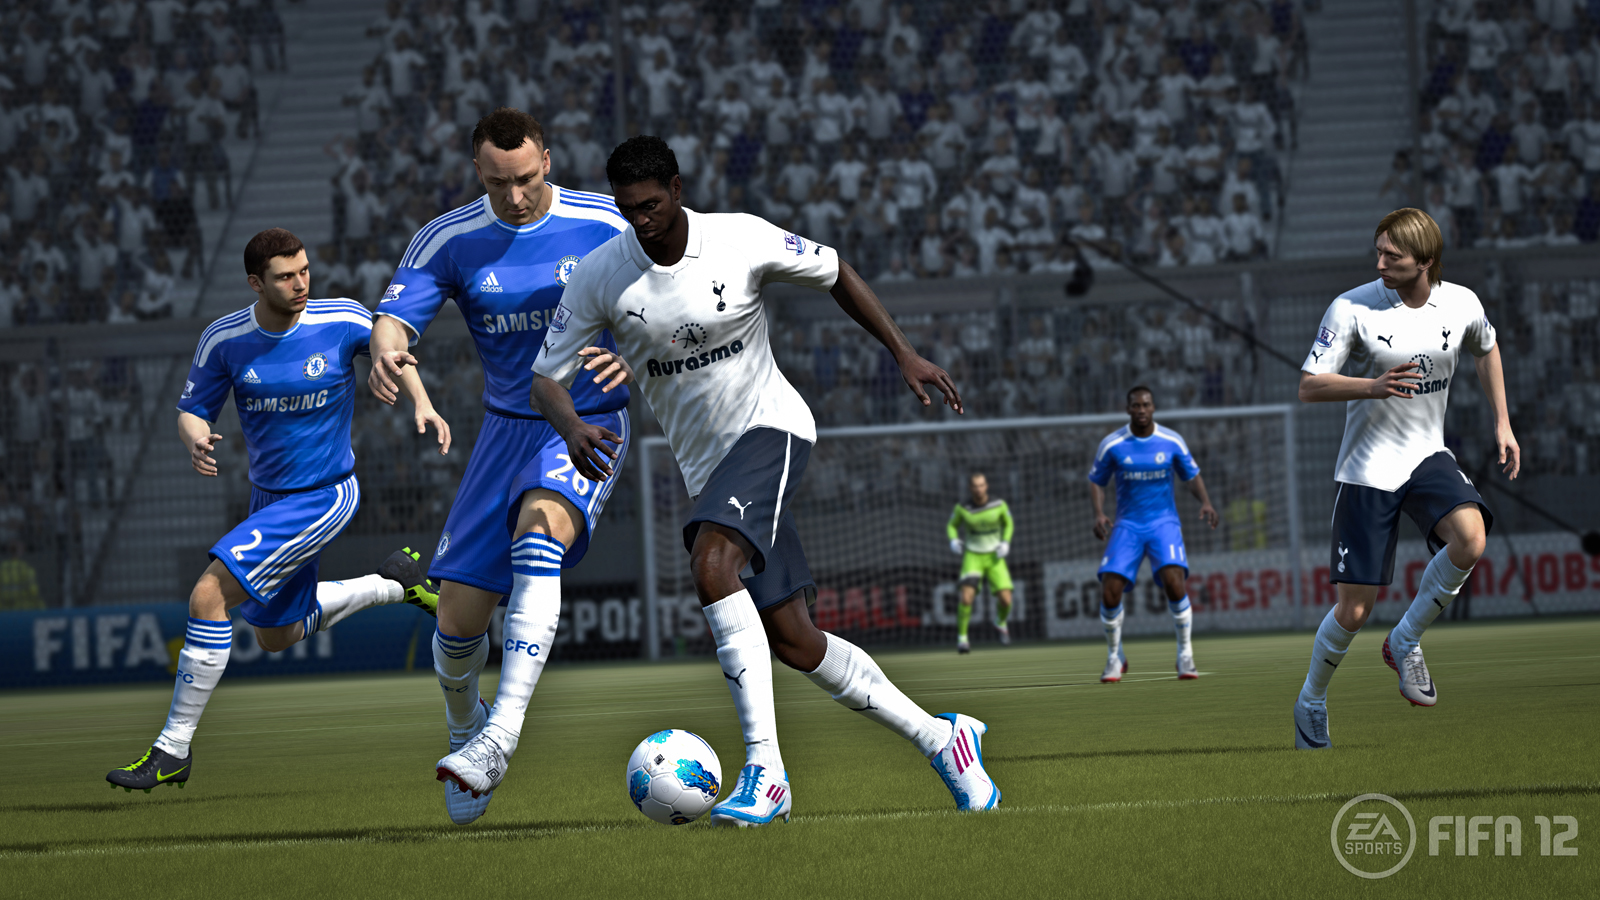 Download Fifa 12 For Pc